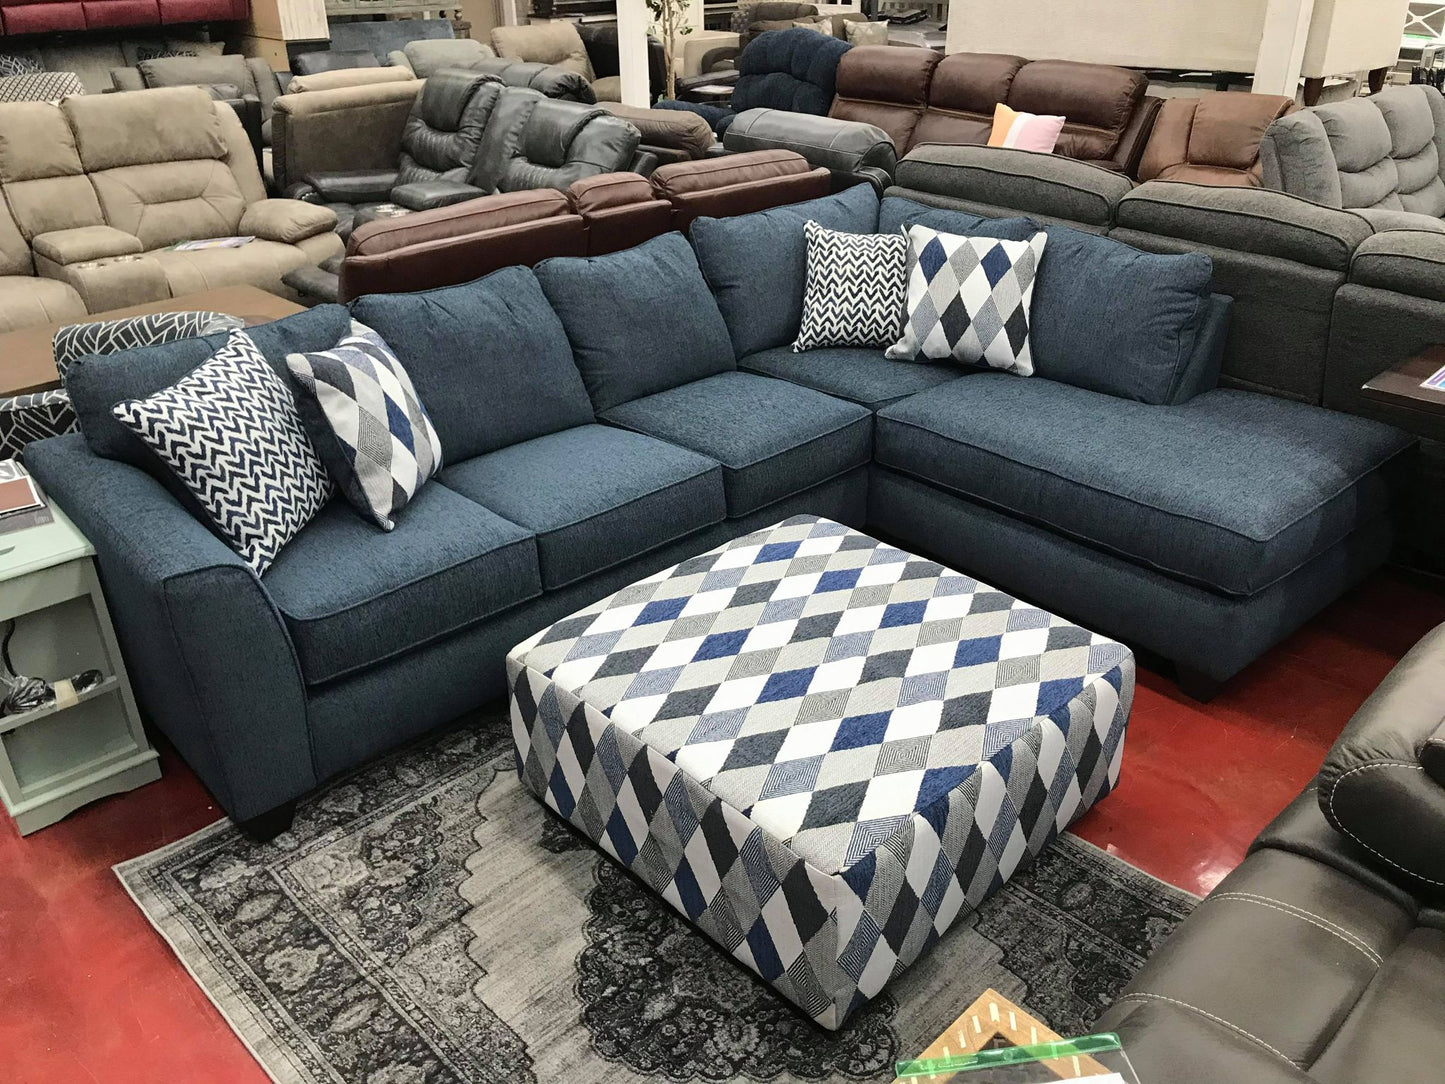 WEEKLY or MONTHLY. Endurance Denim Sectional